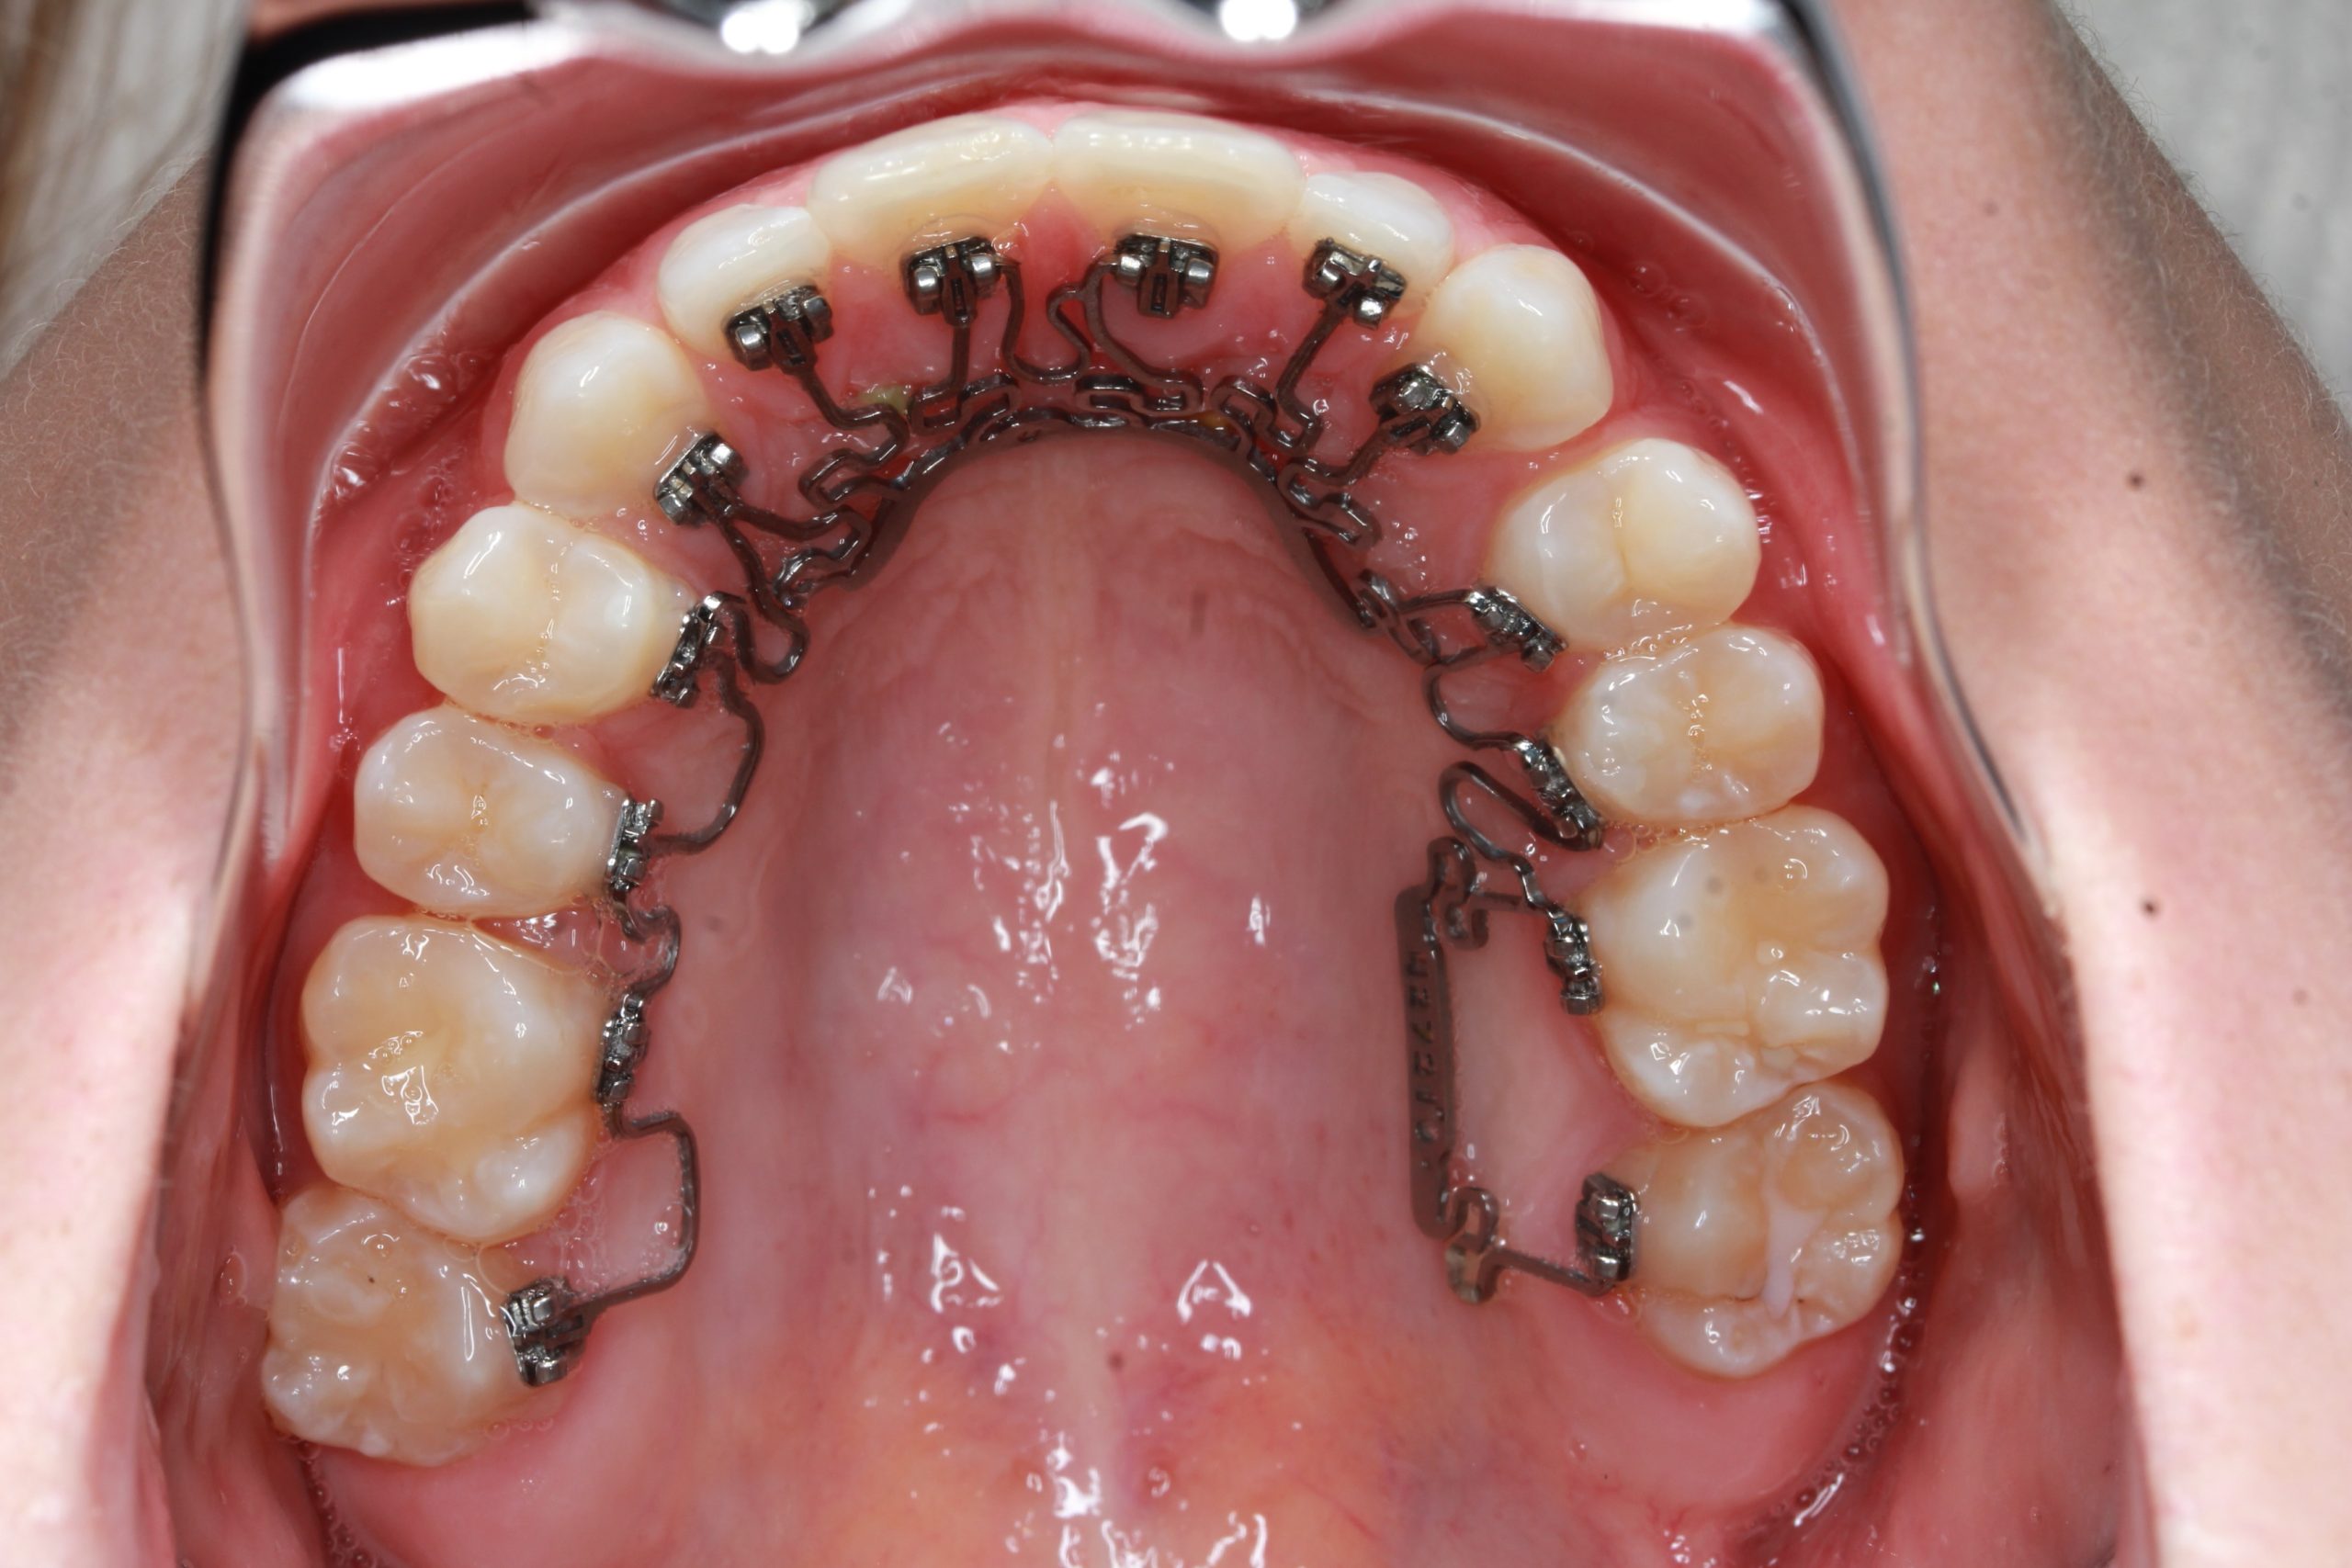 What You Should Know About Lingual Braces